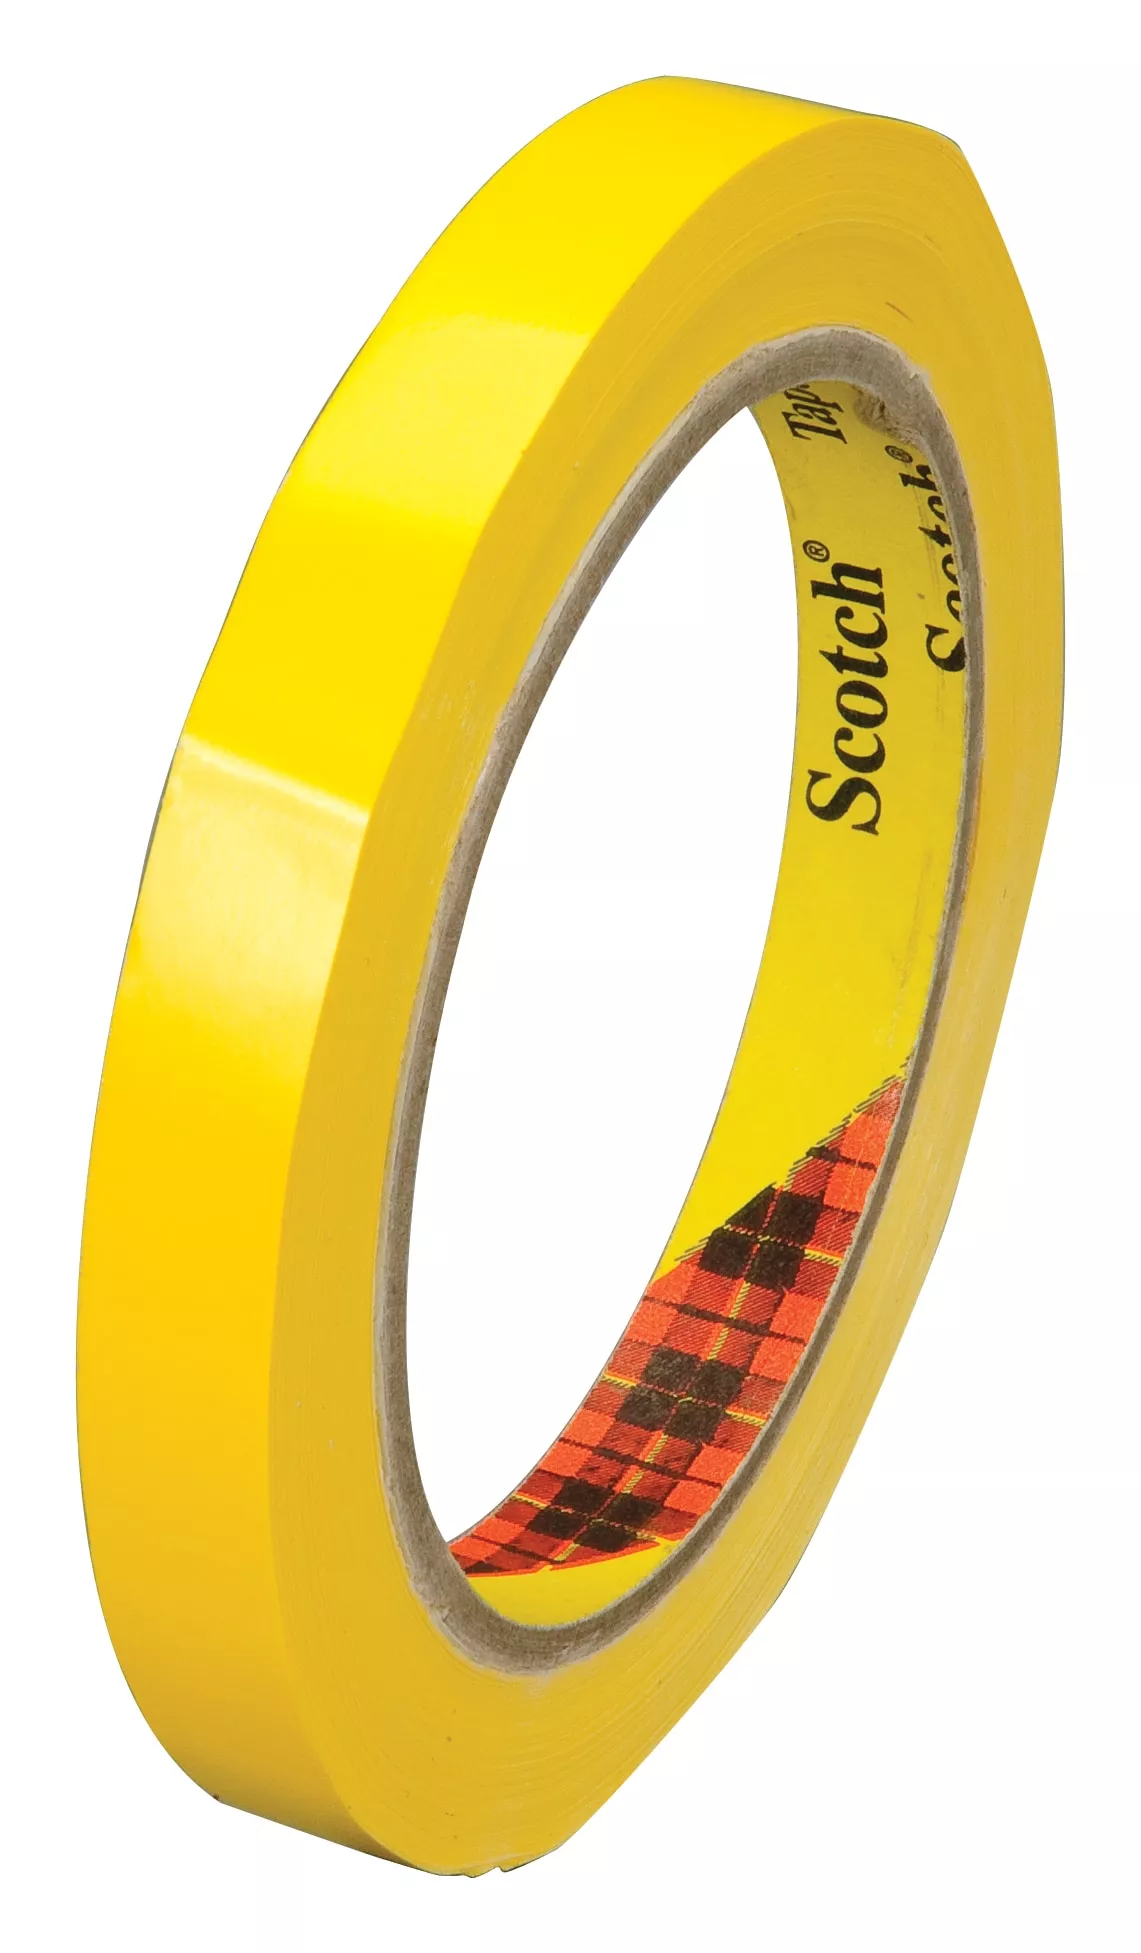 Product Number 690 | Scotch® Color Coding Tape 690